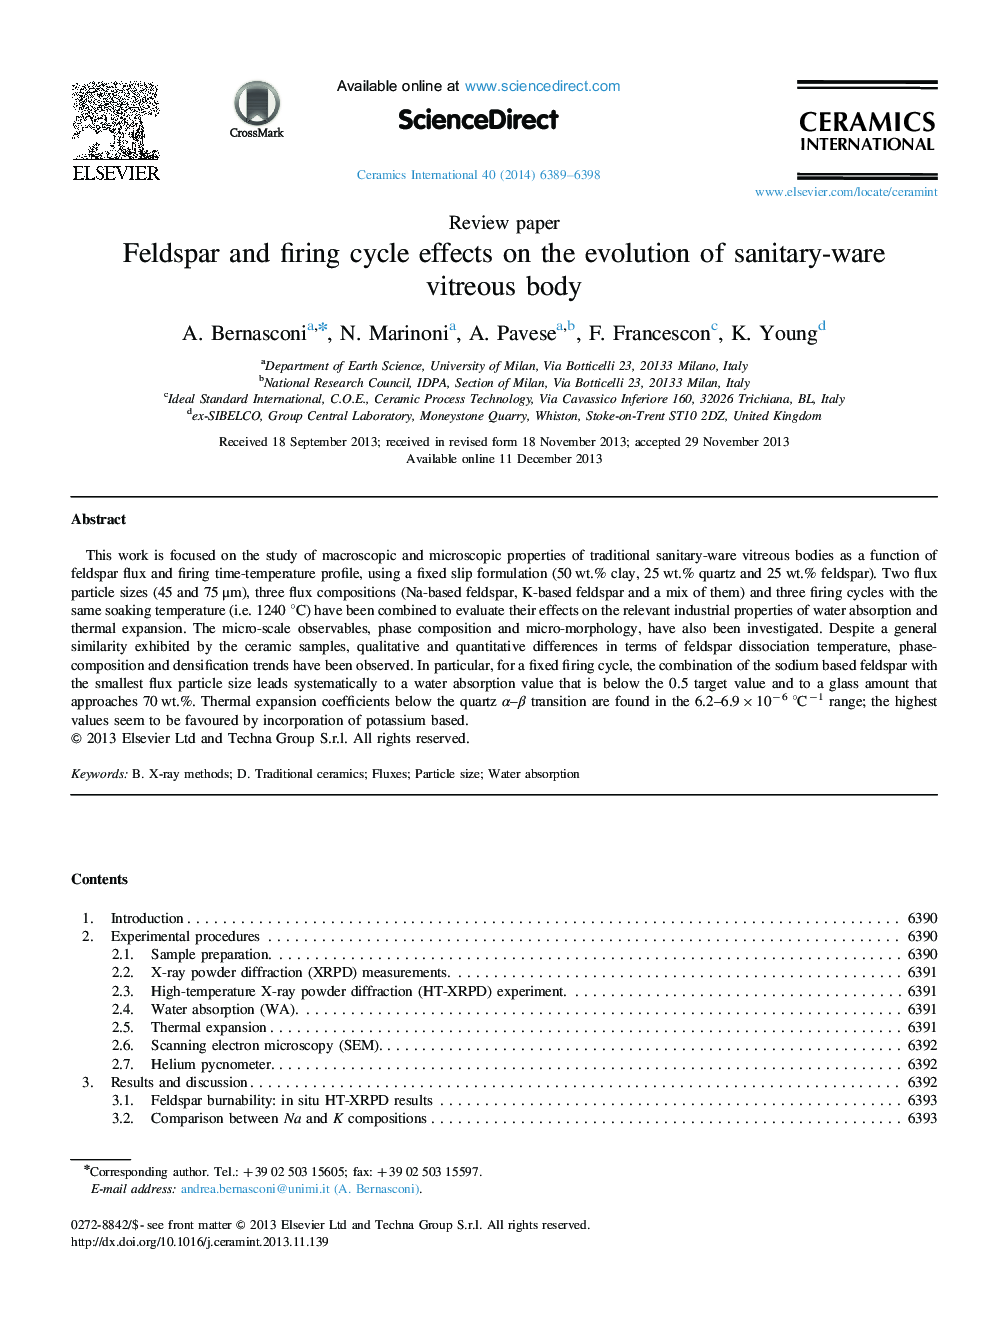 Feldspar and firing cycle effects on the evolution of sanitary-ware vitreous body